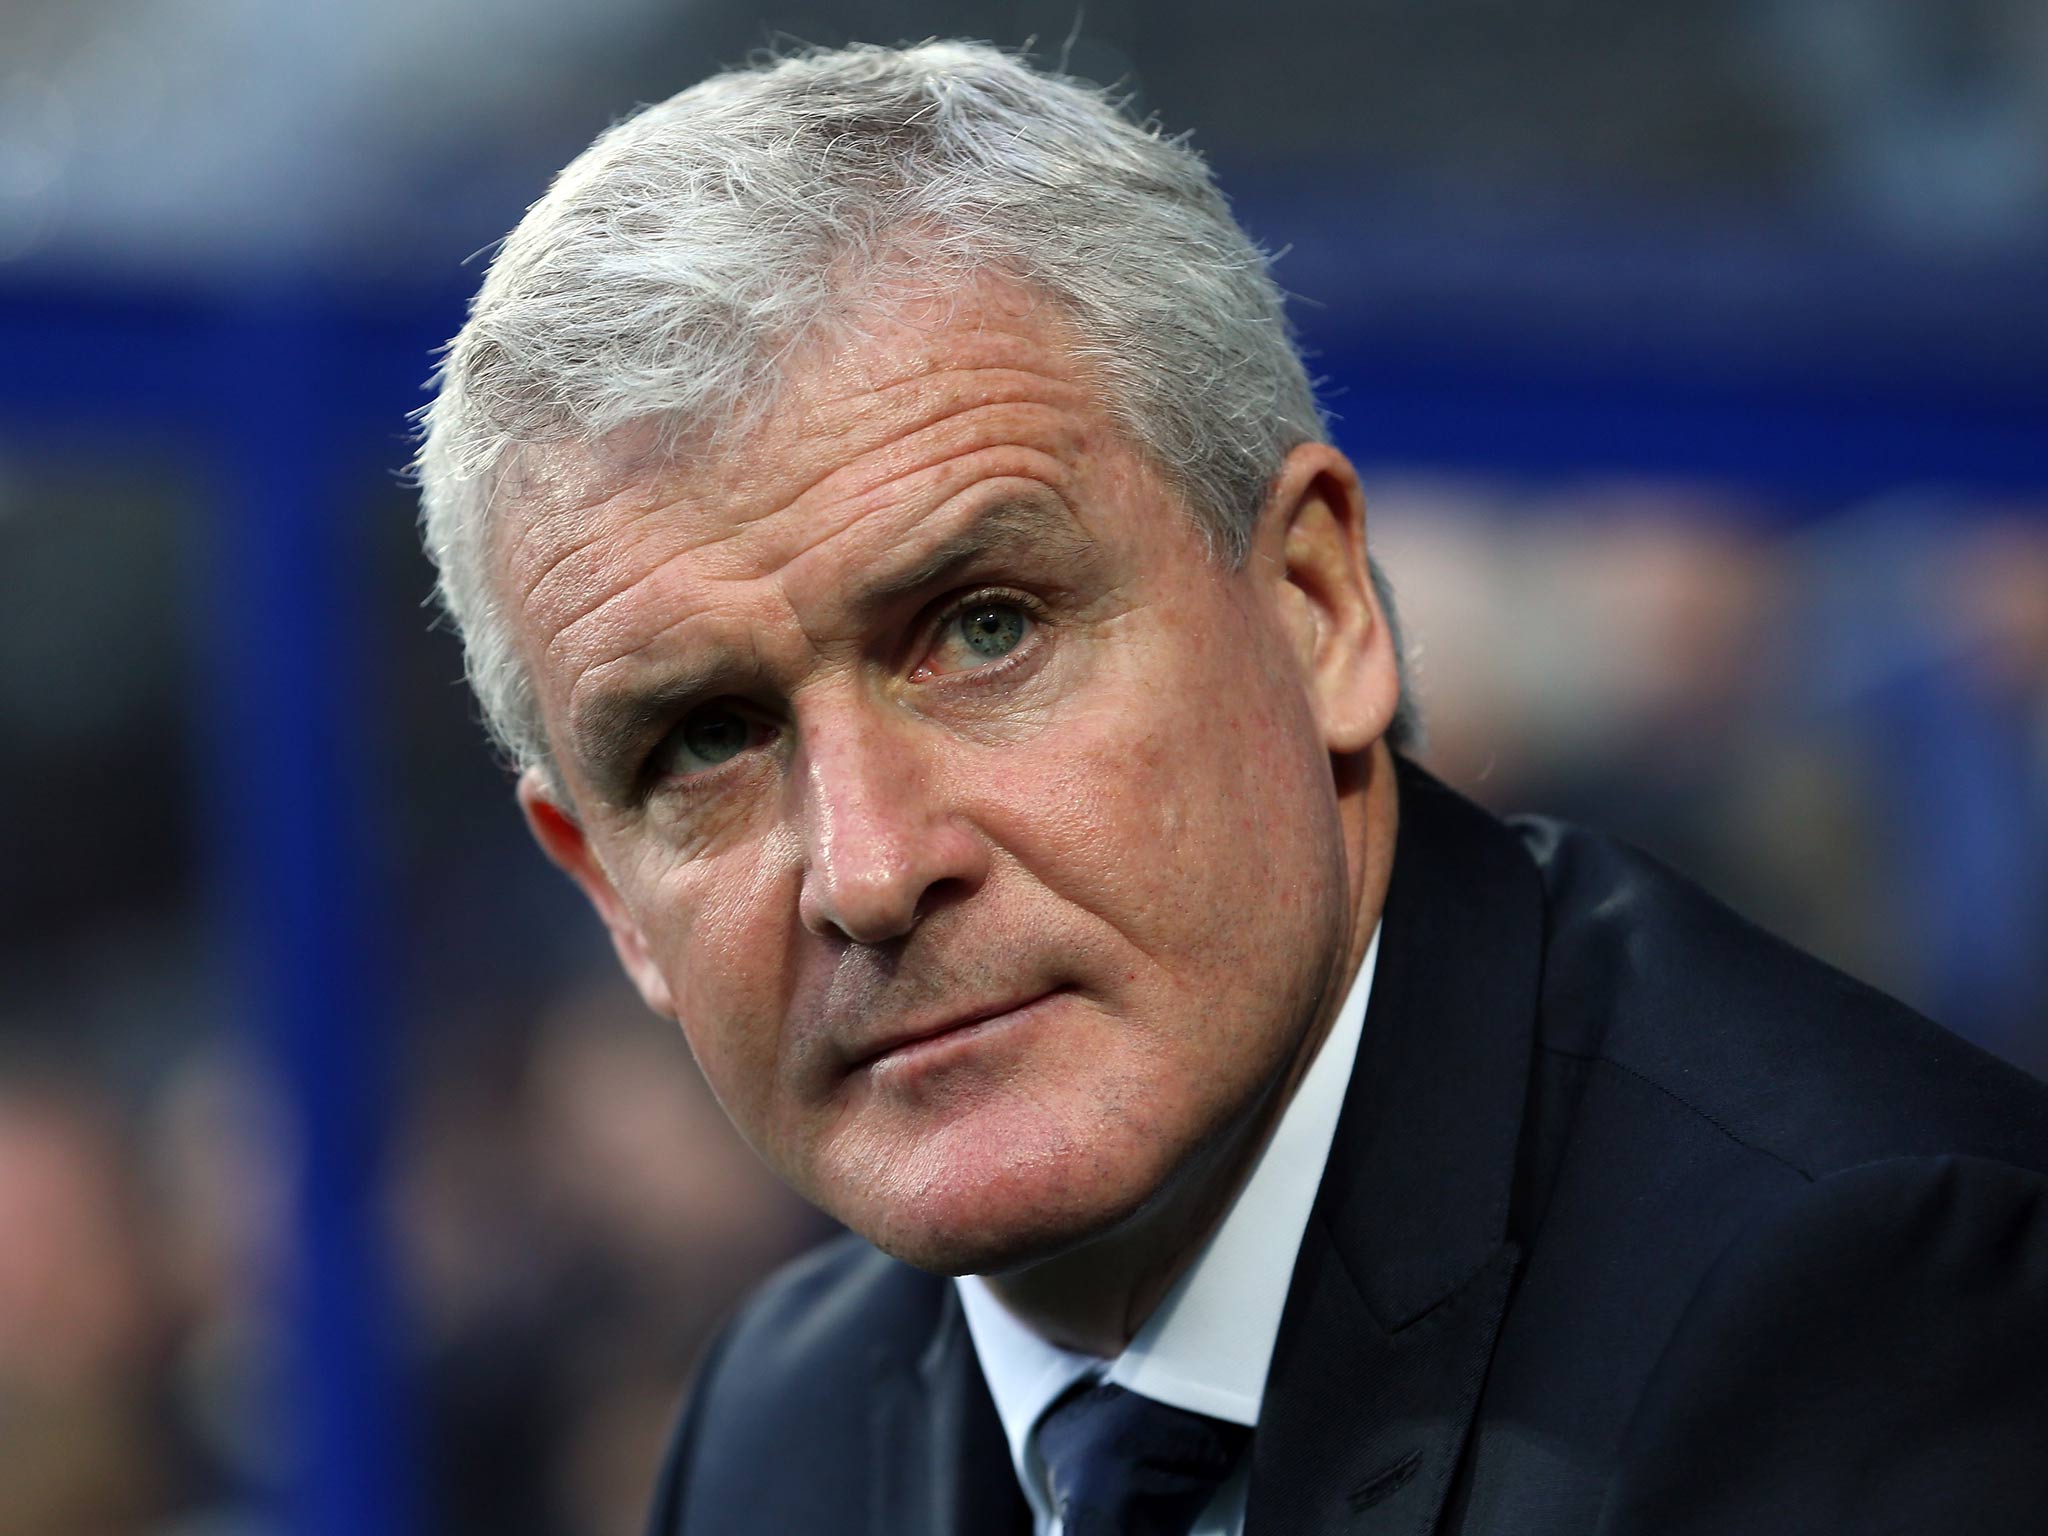 November 23 - Mark Hughes (QPR) Despite chairman Tony Fernandes consistently stating Mark Hughes' job was safe, a failure to win a single game in 12 Premier League matches finally told for the Welshman. The former Fulham manager had join